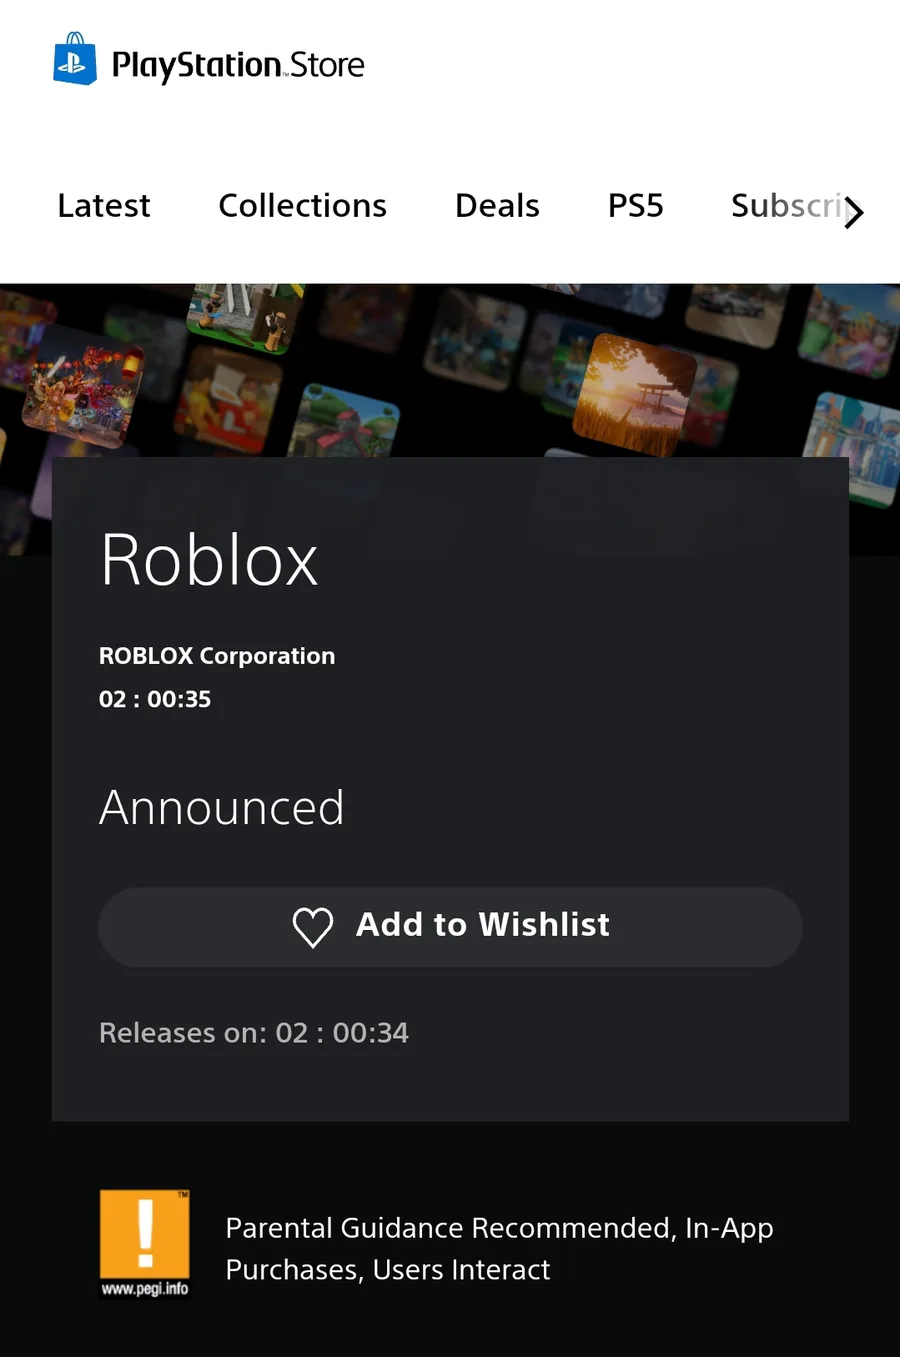 Get ready to experience #Roblox, now available on PlayStation 4